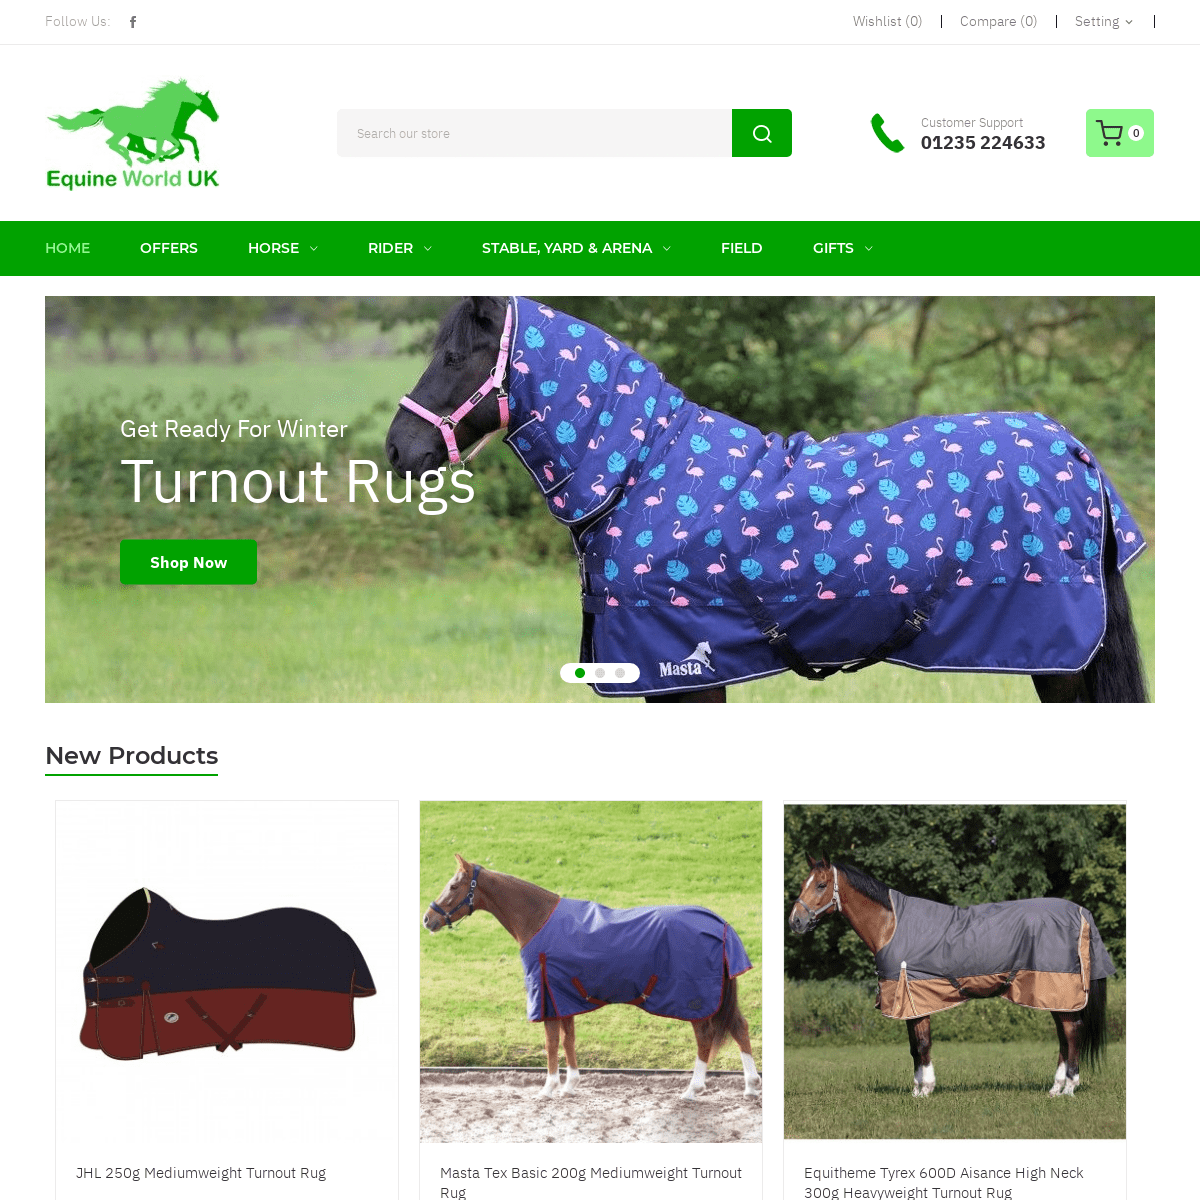 A complete backup of equineworld.co.uk